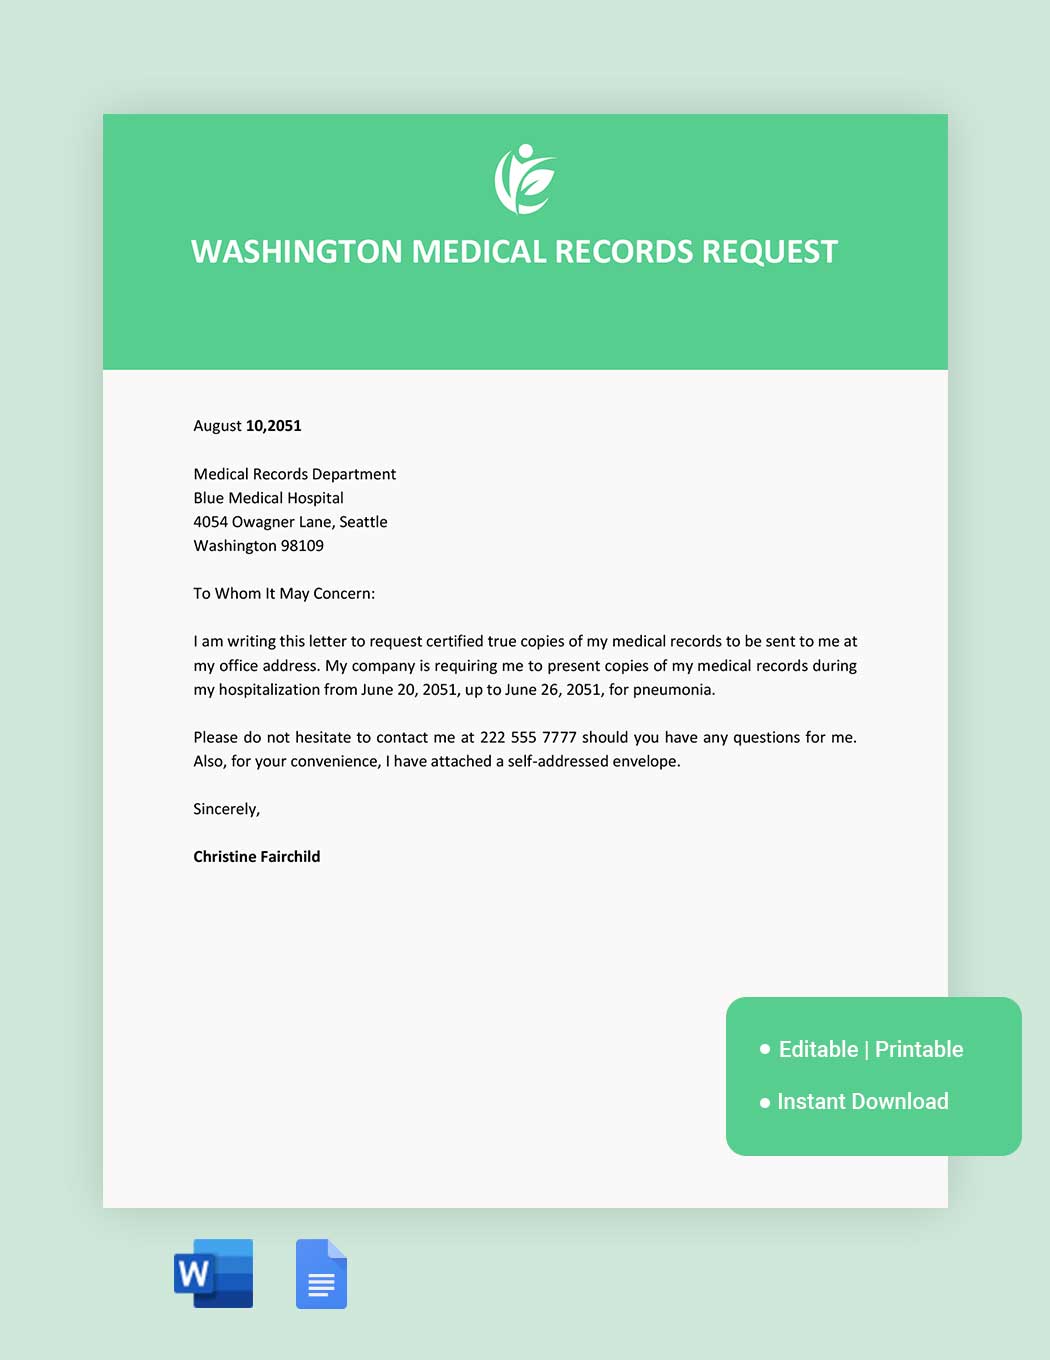 Washington Medical Records Request Template in Word, Google Docs